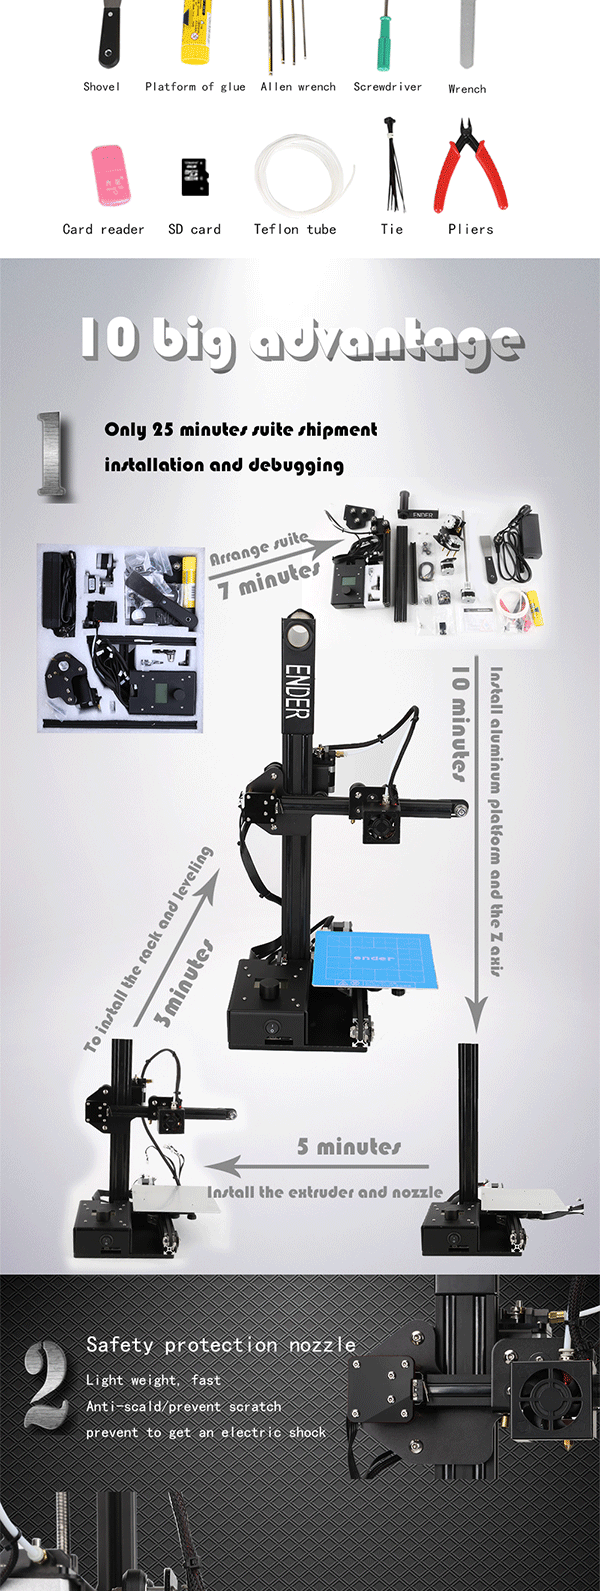 Creality 3D® Ender-2 DIY 3D Printer Kit 150*150*200mm Printing Size With Auto Leveling 1.75mm 0.4mm Nozzle 7